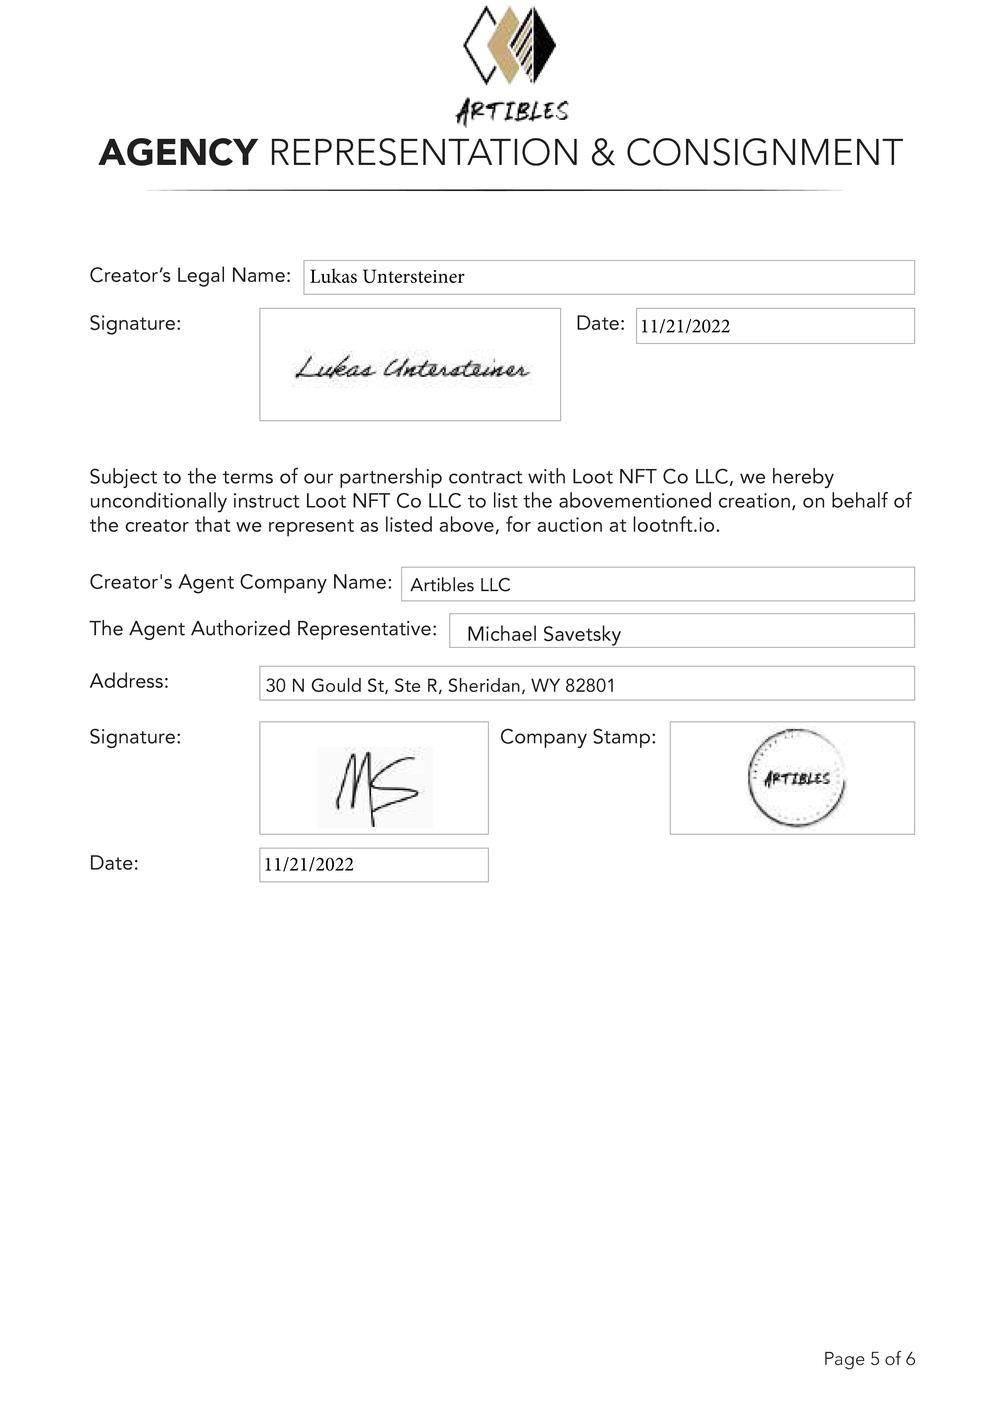 Certificate of Authenticity and Consignment - Beach.pdf